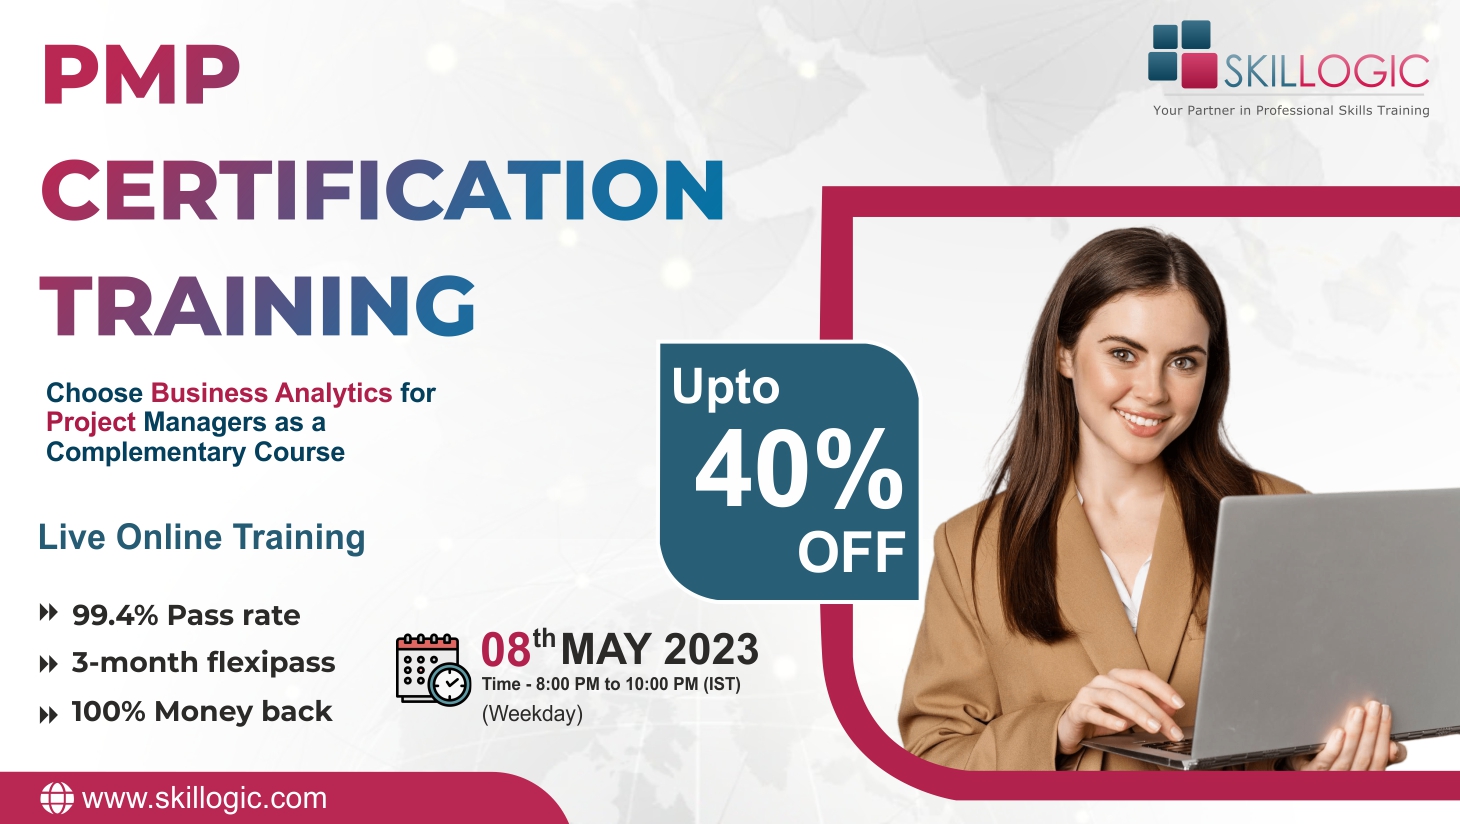 PMP training Course in Bangalore, Online Event